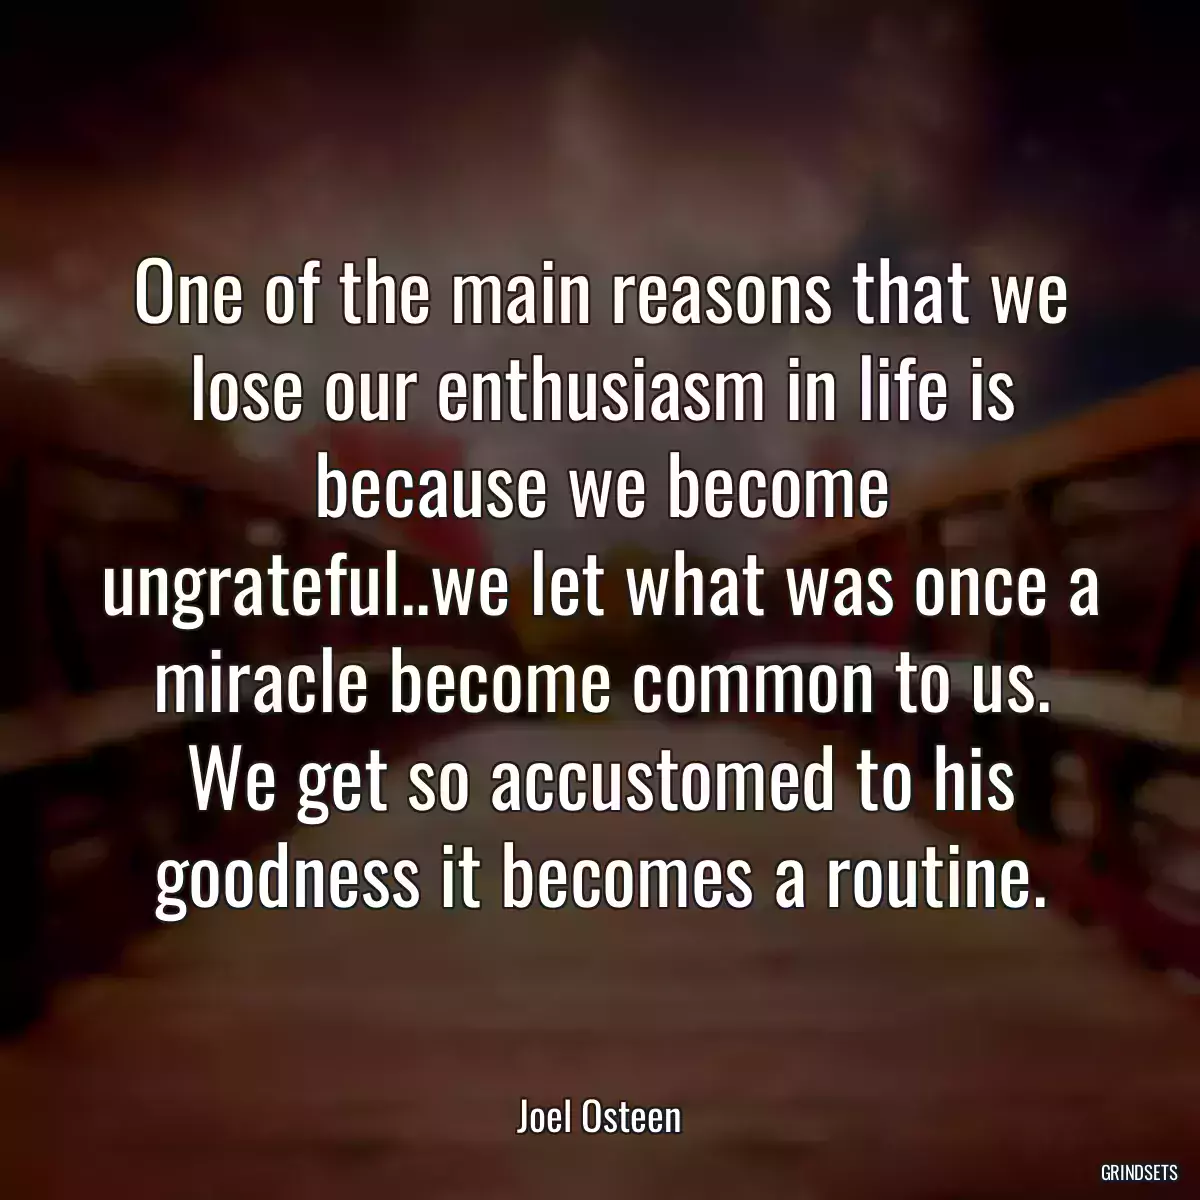 One of the main reasons that we lose our enthusiasm in life is because we become ungrateful..we let what was once a miracle become common to us. We get so accustomed to his goodness it becomes a routine.